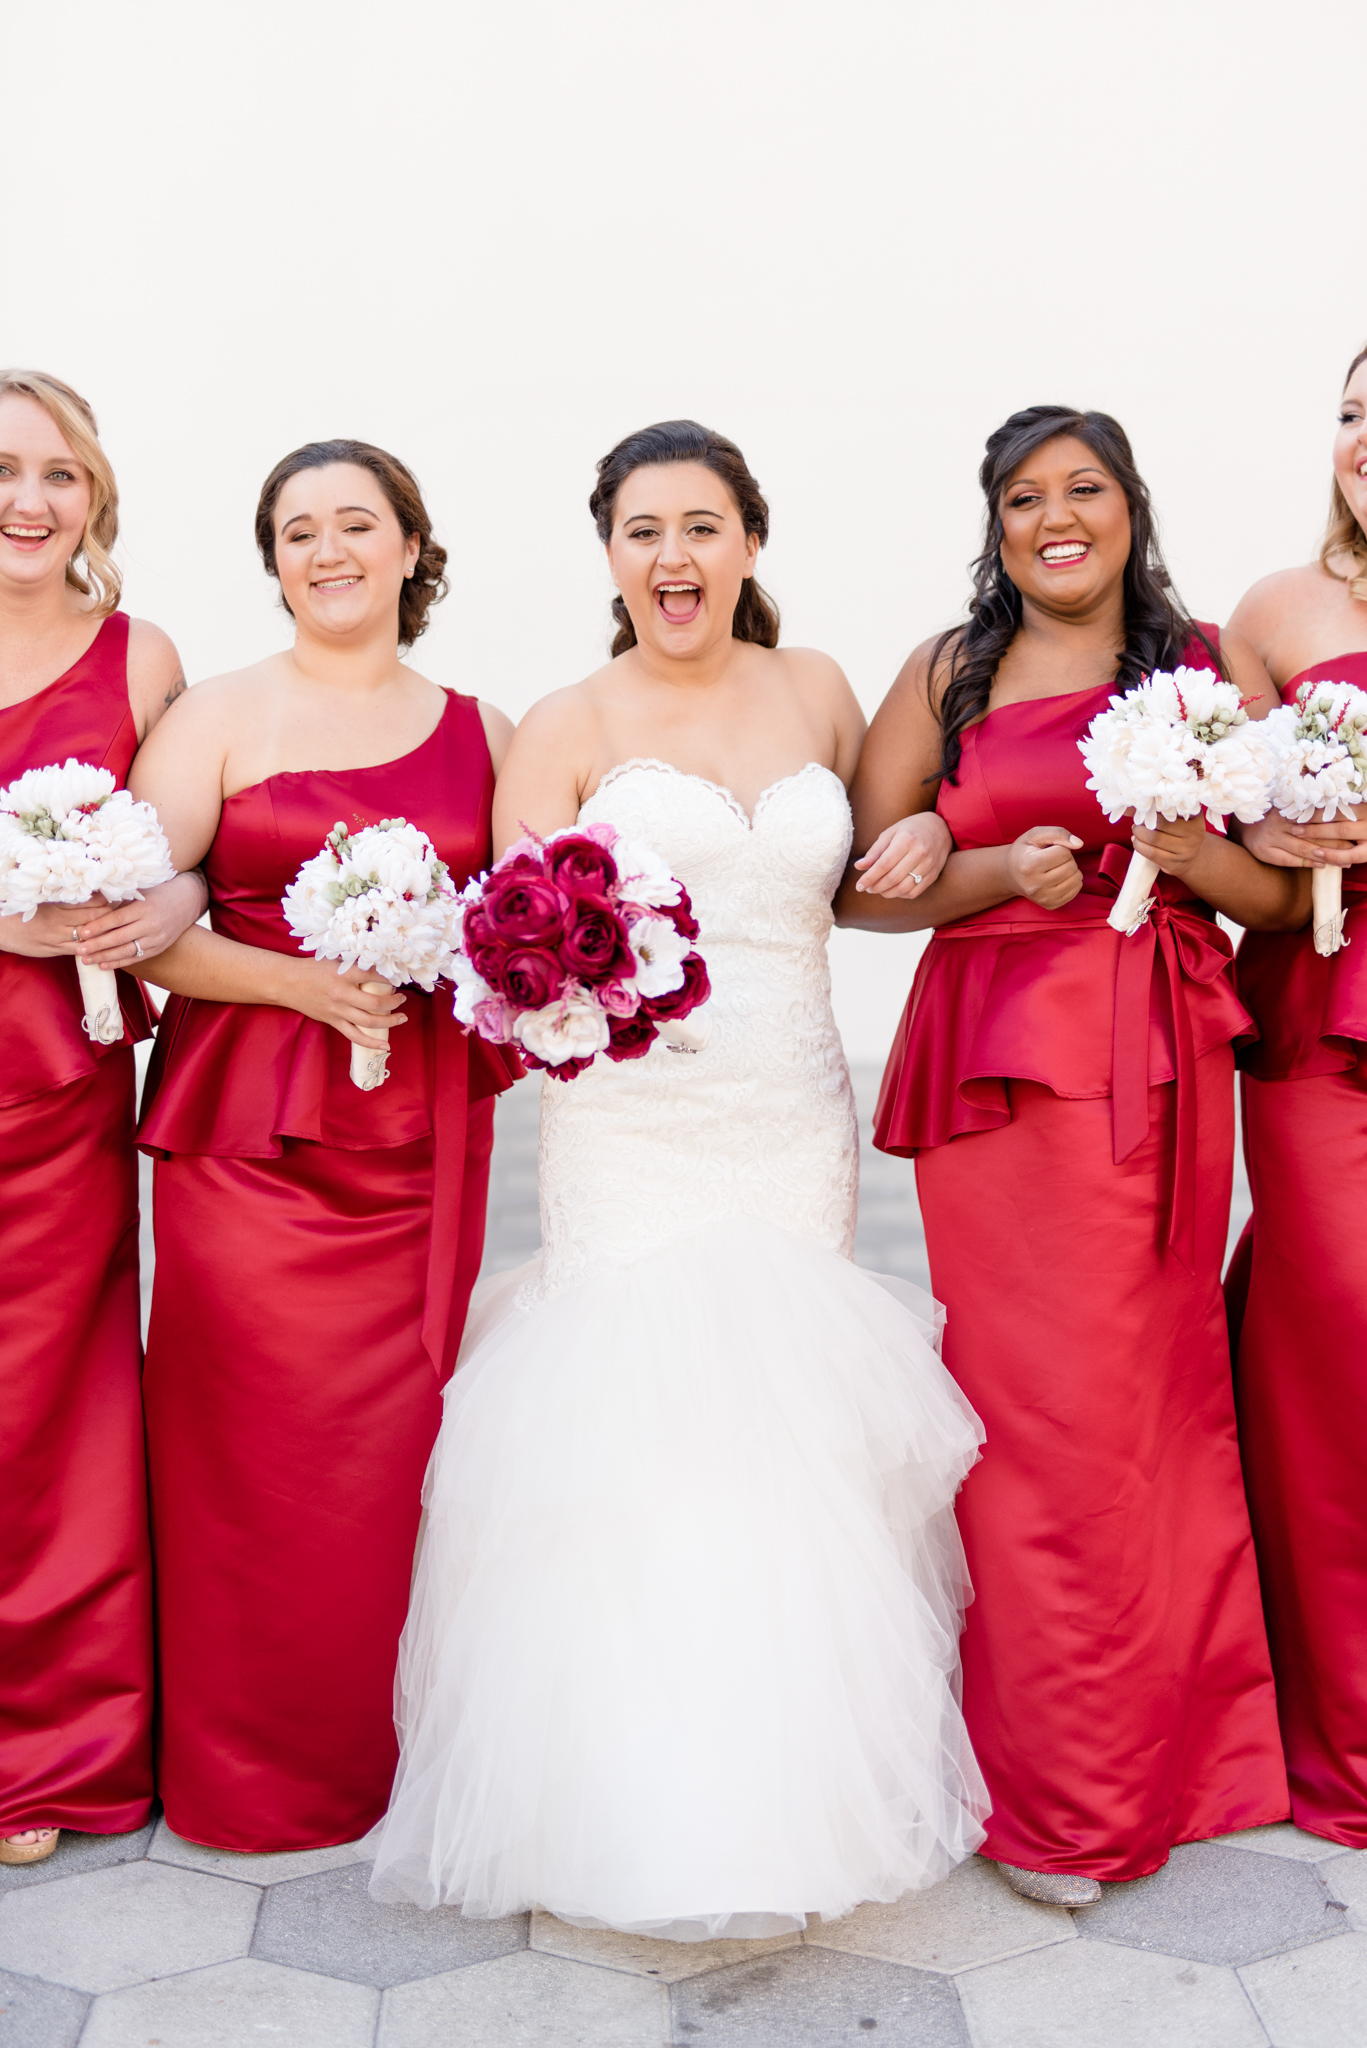 Bride smiles while walking with bridesmaids.